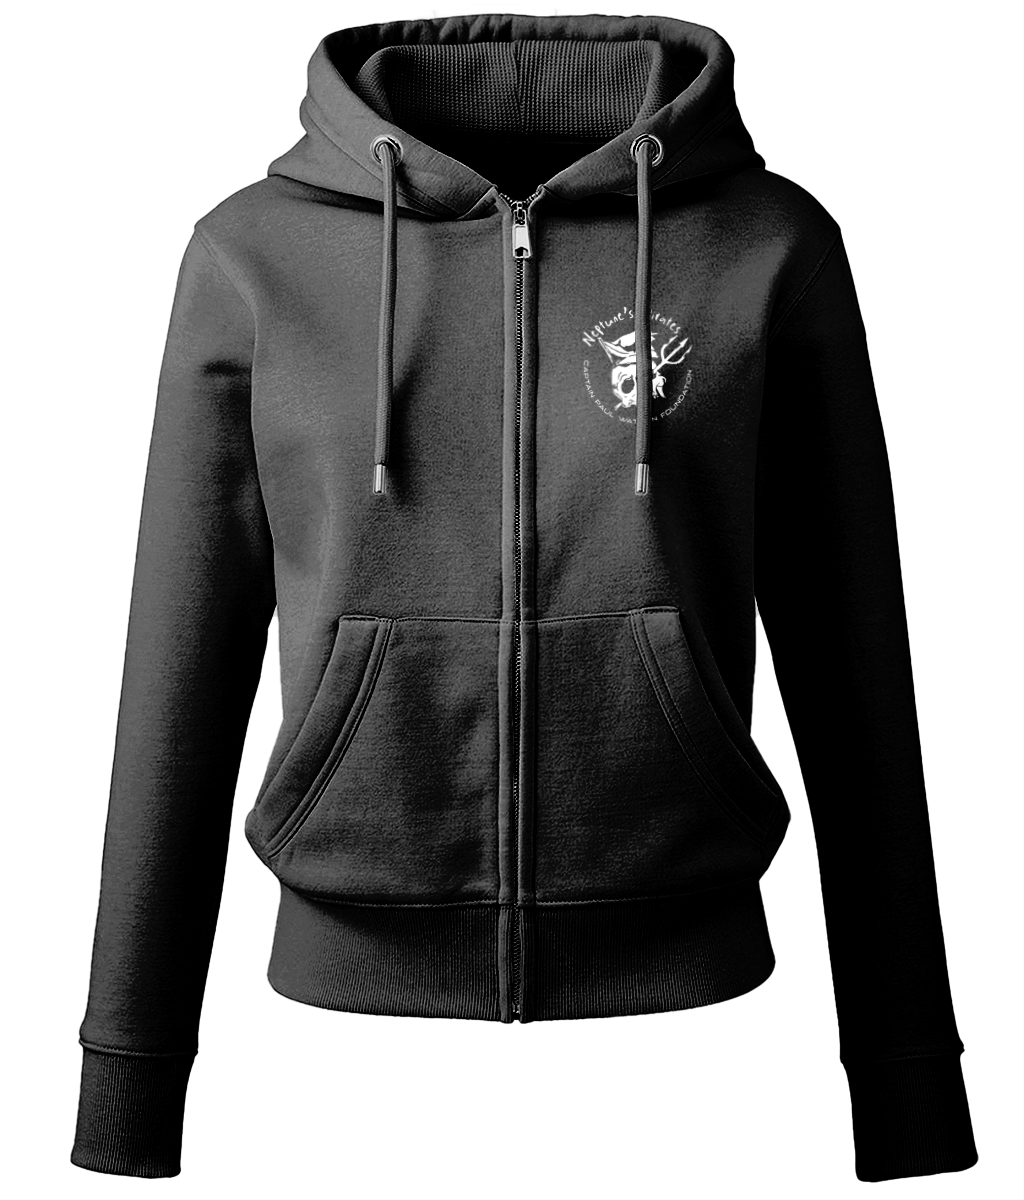 Retro 'Save The Whales' Women's Zip Hoodie - Captain Paul Watson Foundation (t/a Neptune's Pirates)